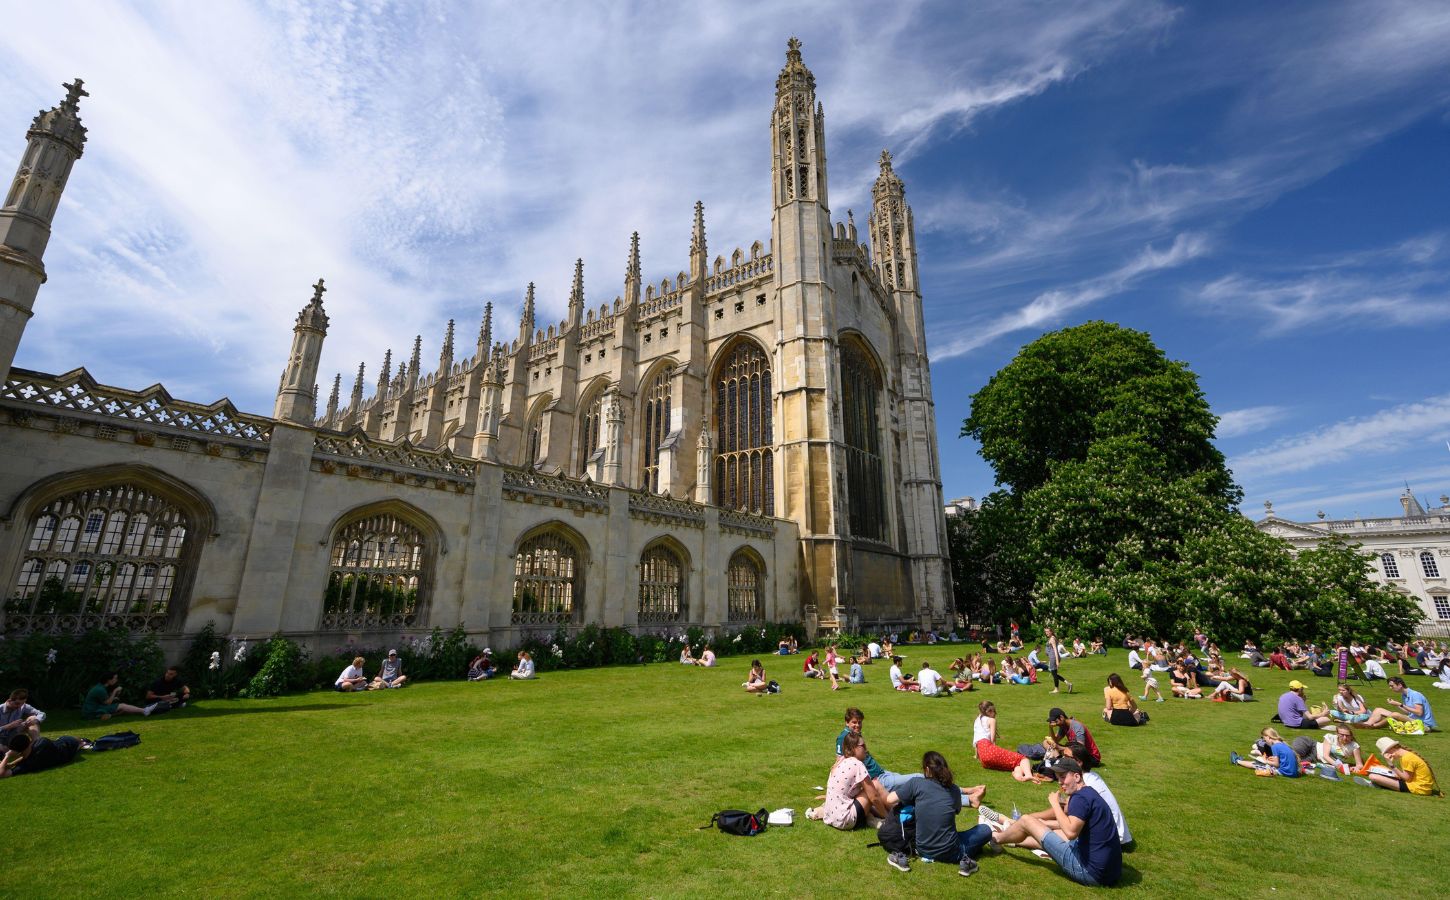 The outside of the University of Cambridge, which has just announced plans to go plant-based